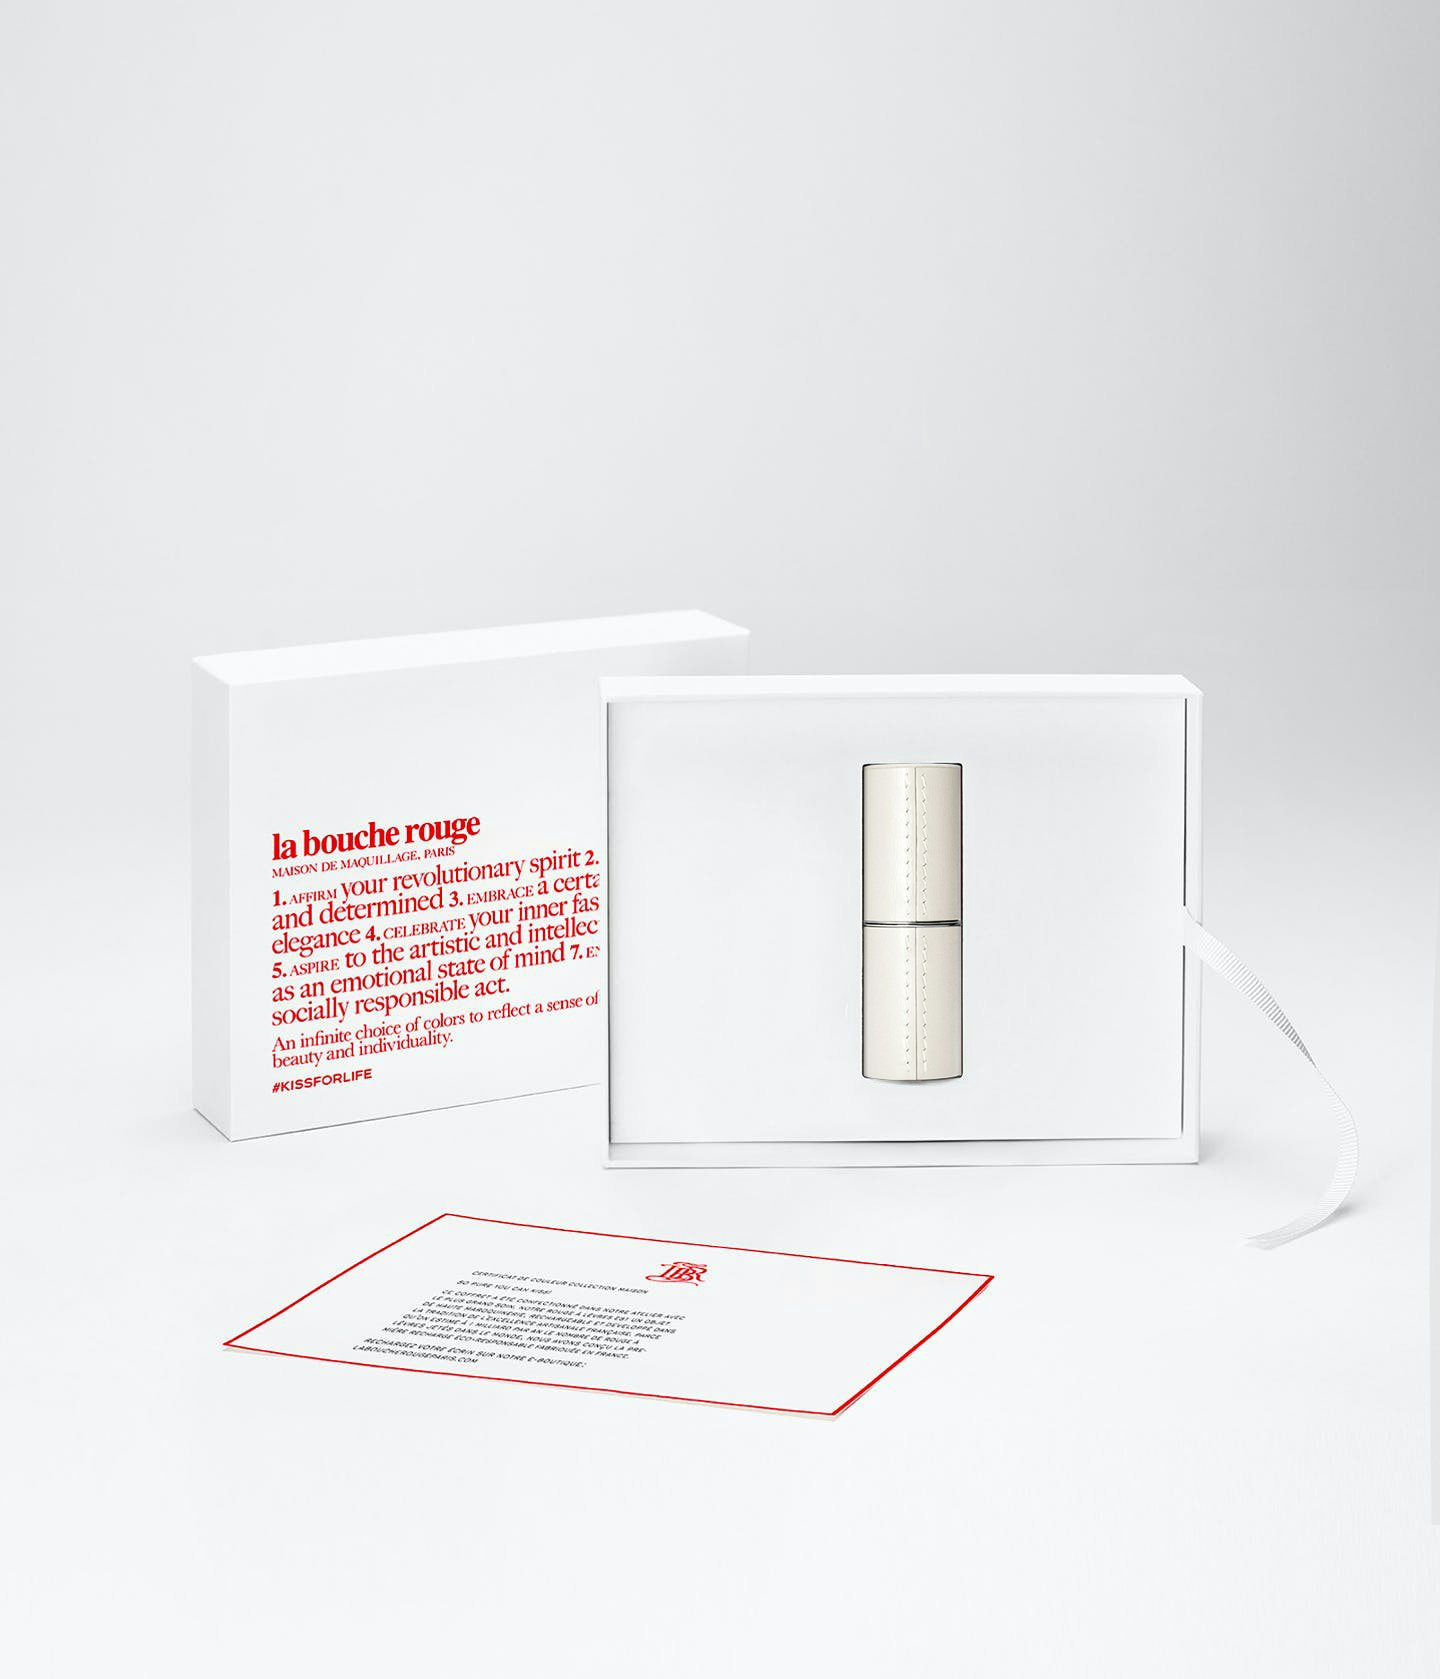 La bouche rouge white fine leather case in the Manifesto packaging